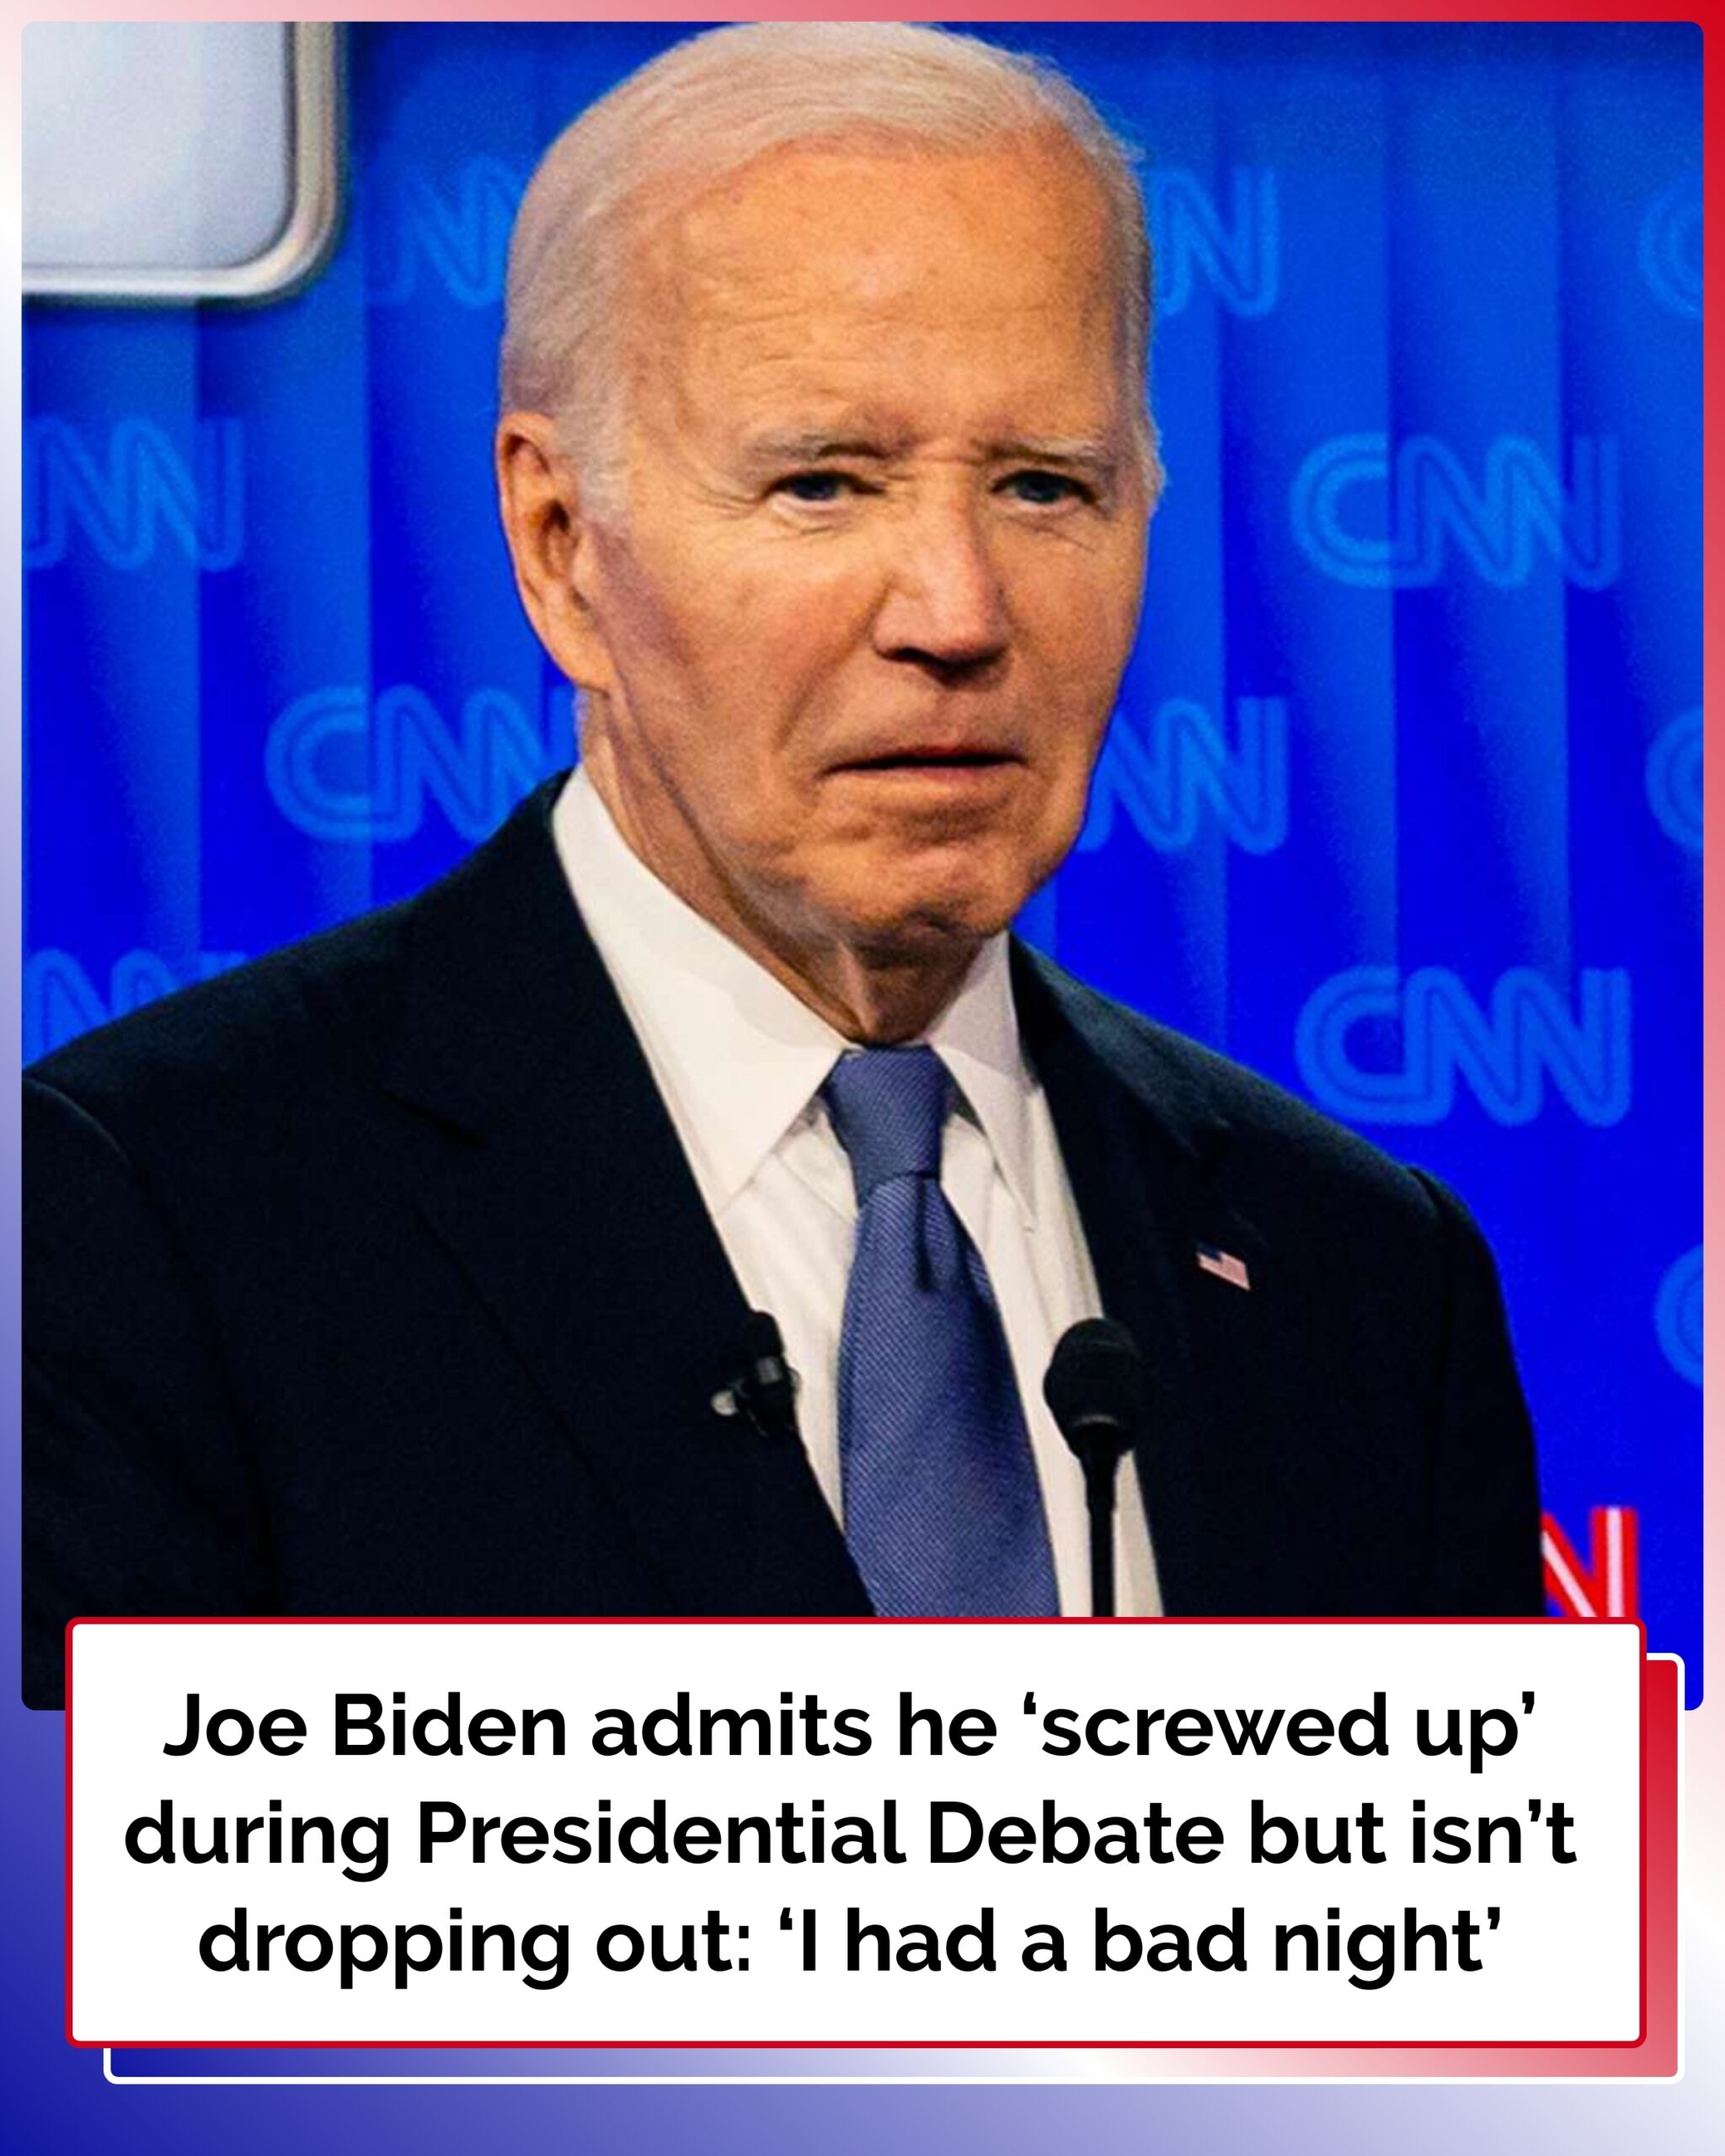 Joe Biden Admits He ‘Screwed Up’ During Presidential Debate but Isn’t Dropping Out: ‘I Had a Bad Night’